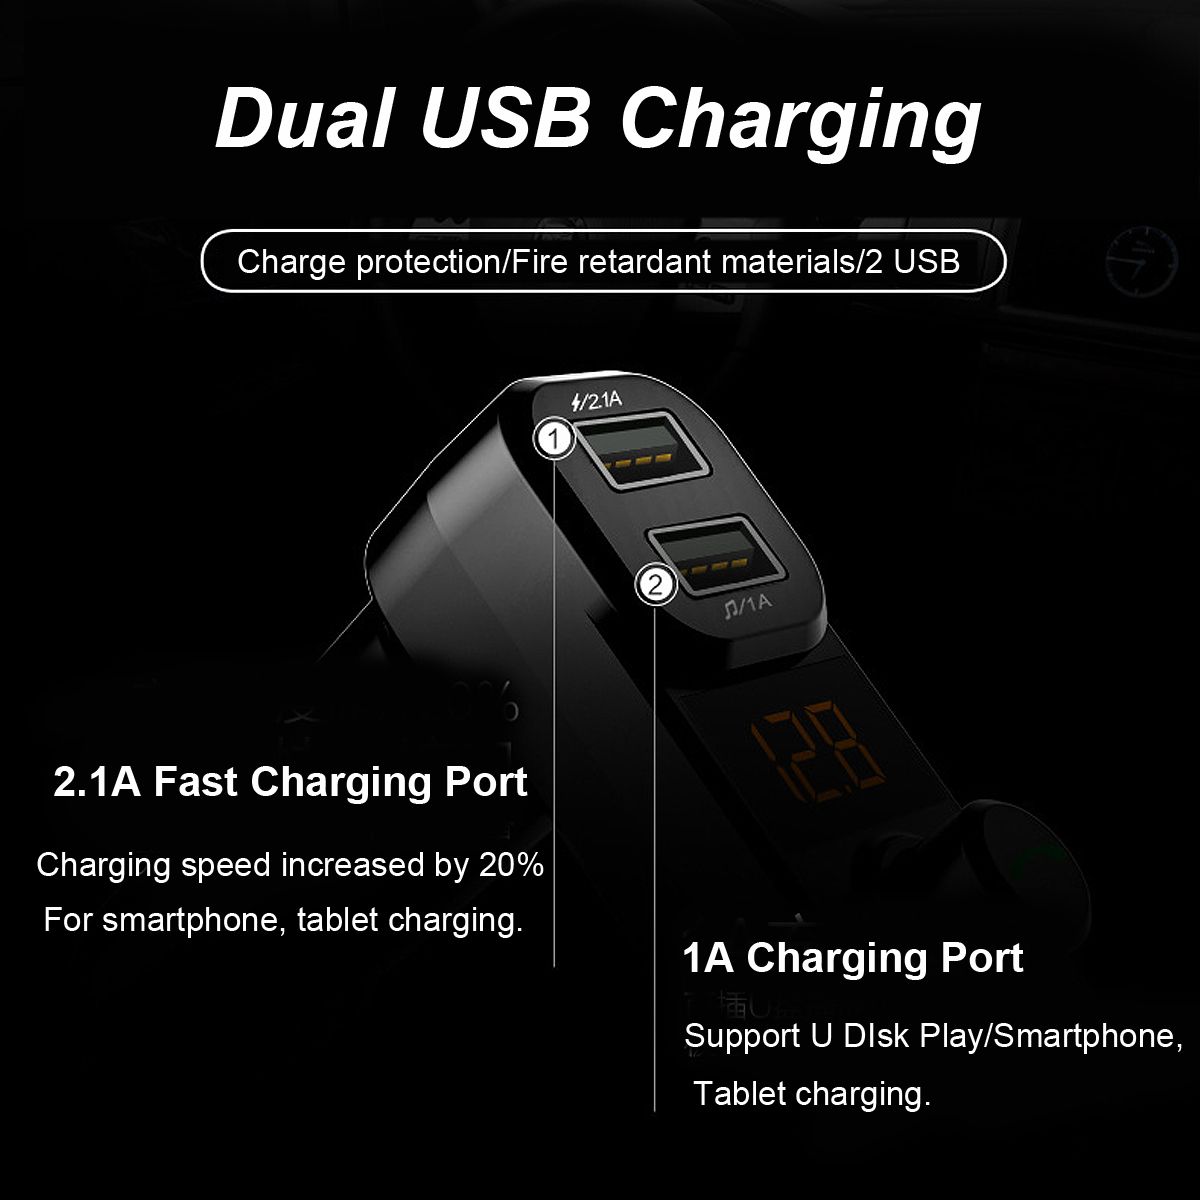 bluetooth-Wireless-Handsfree-Dual-USB-Auto-Car-FM-Transmitter-MP3-Player-Charger-1259587